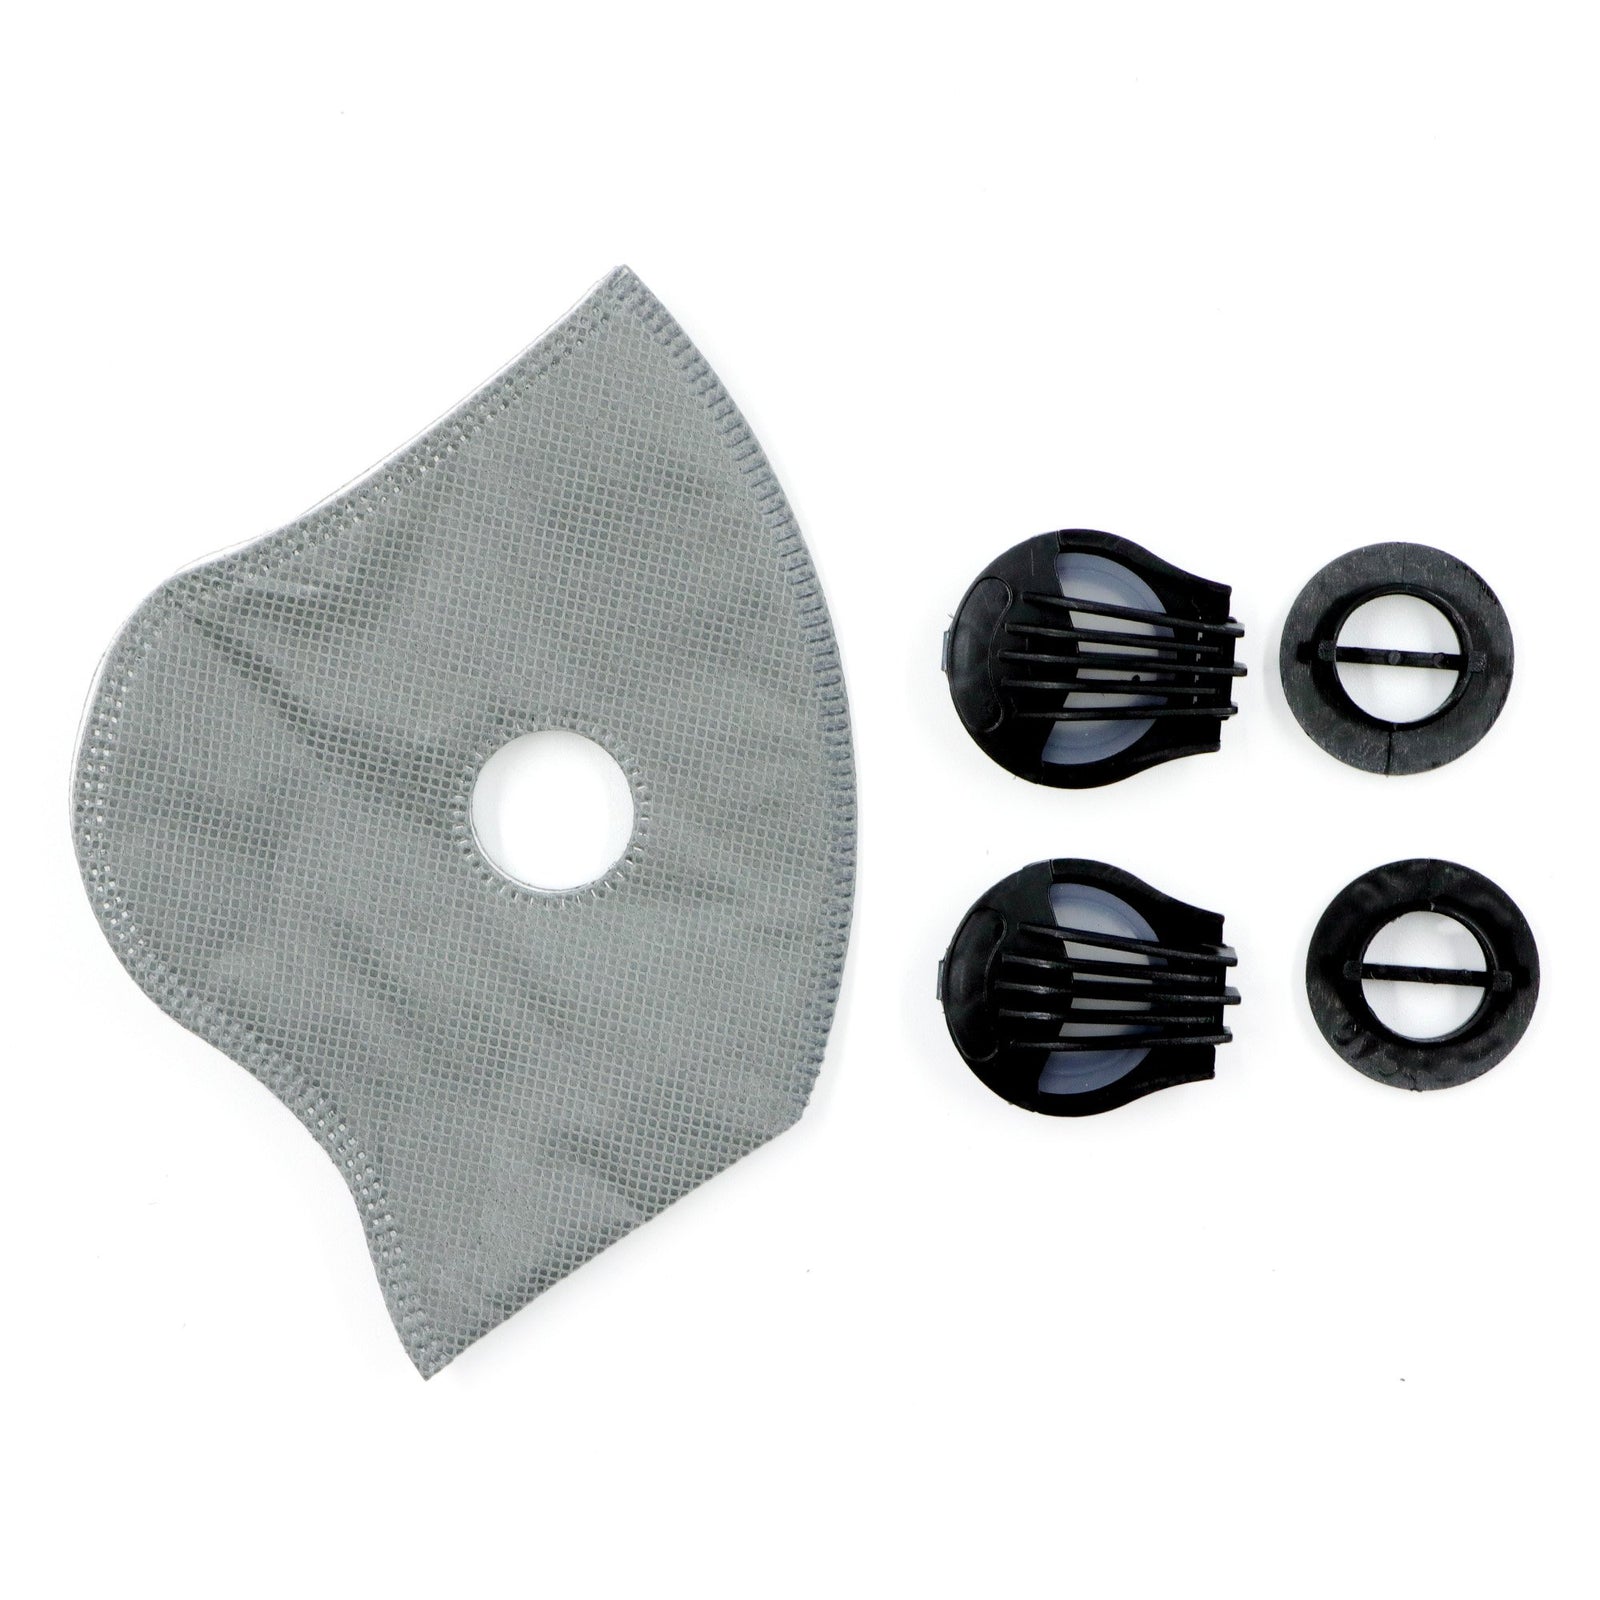 SSFCM-006  Adjustable Sports Face Mask Reusable with Filter and  Exhalation Valves